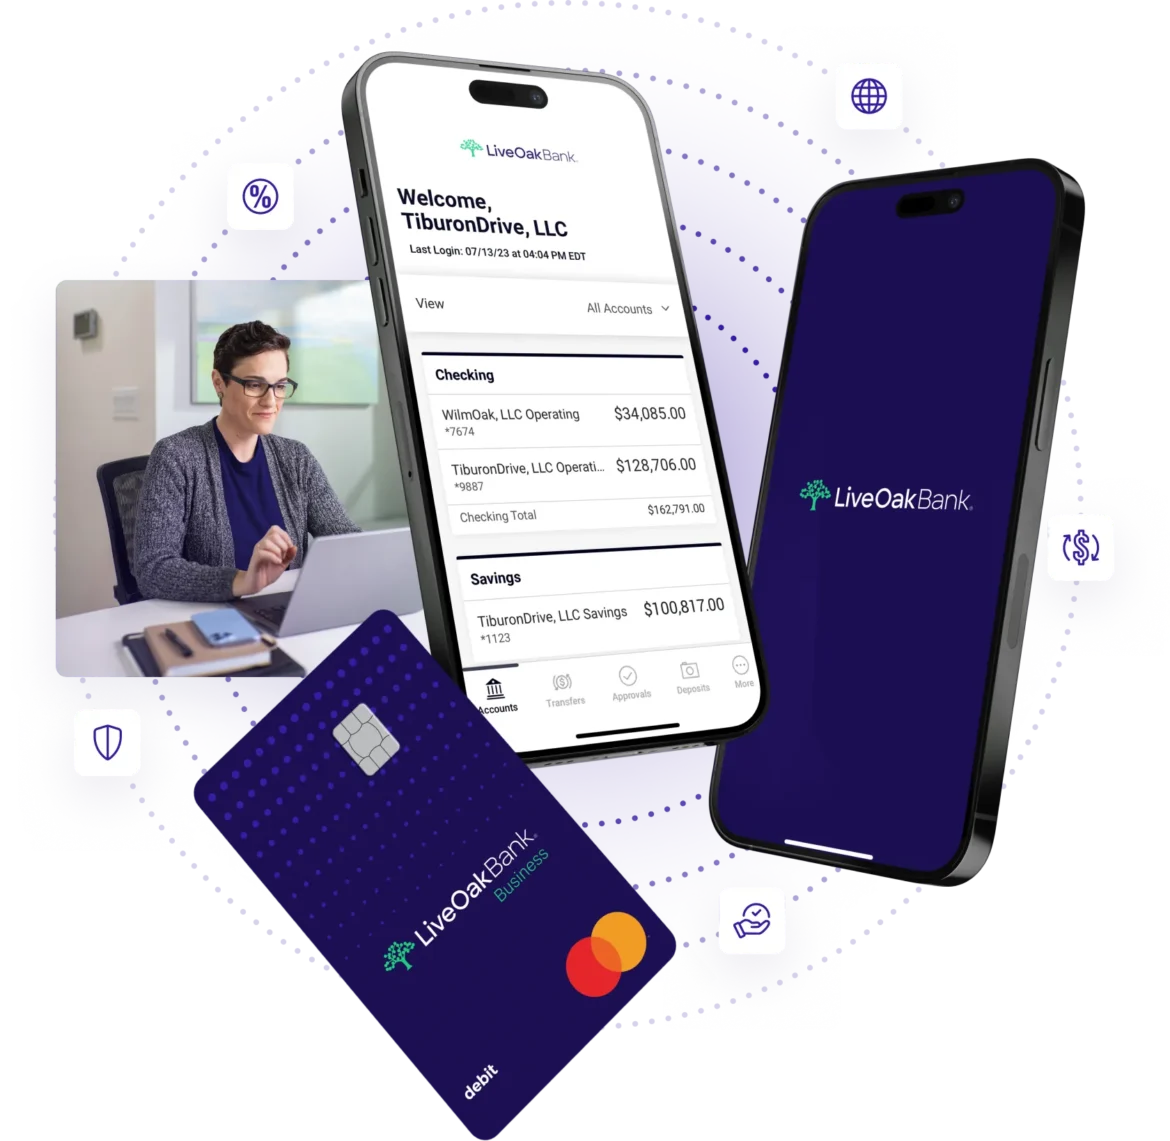 Live Oak Bank mobile banking app and debit card products for small business banking customers